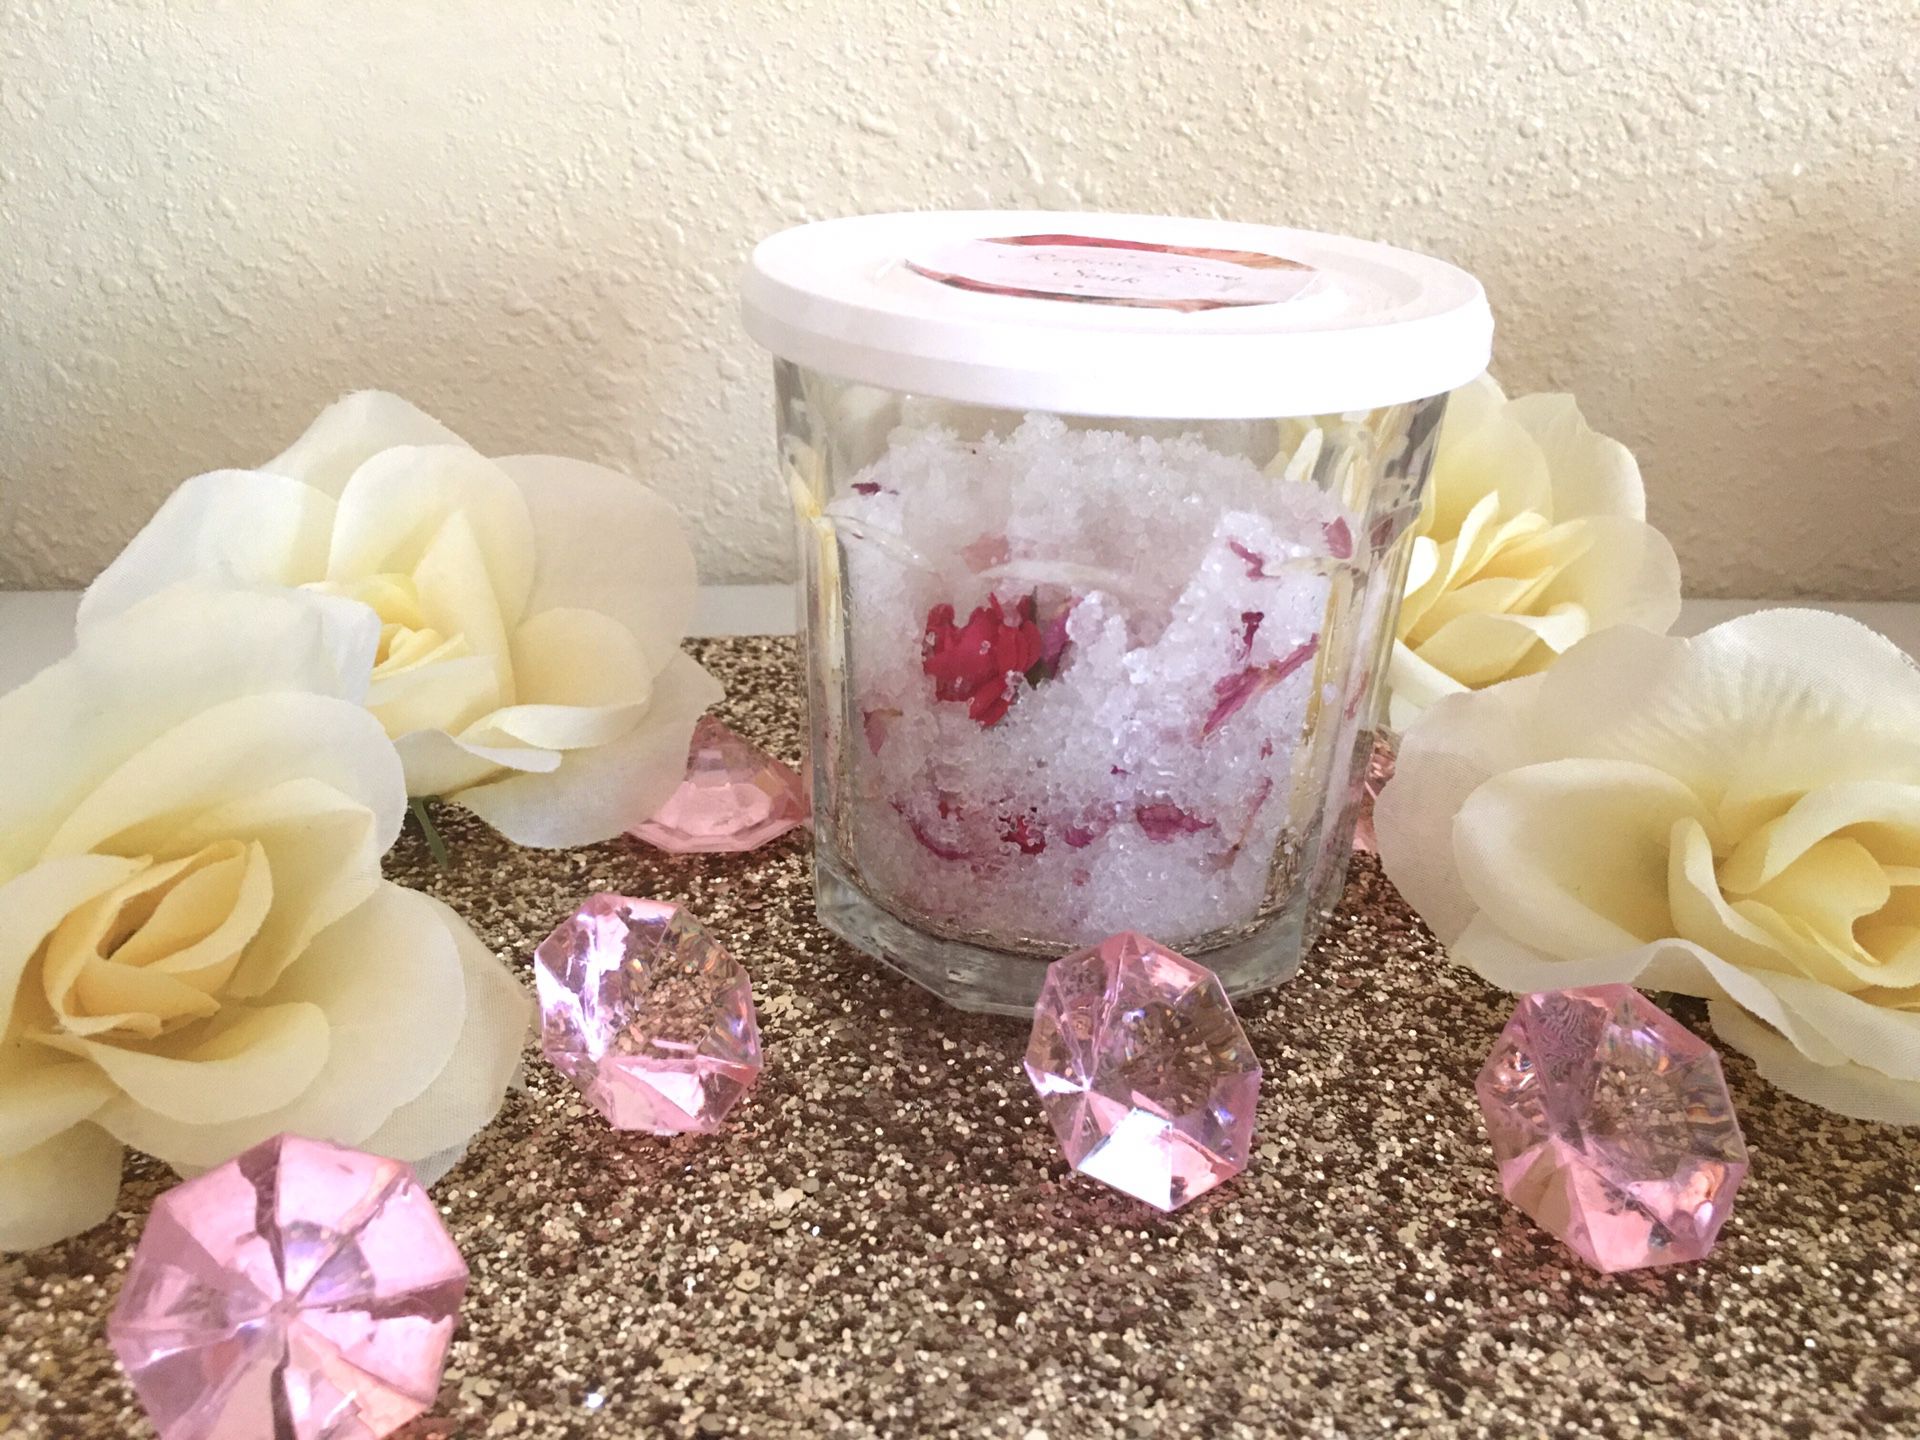 Rose petal beauty products 🌹